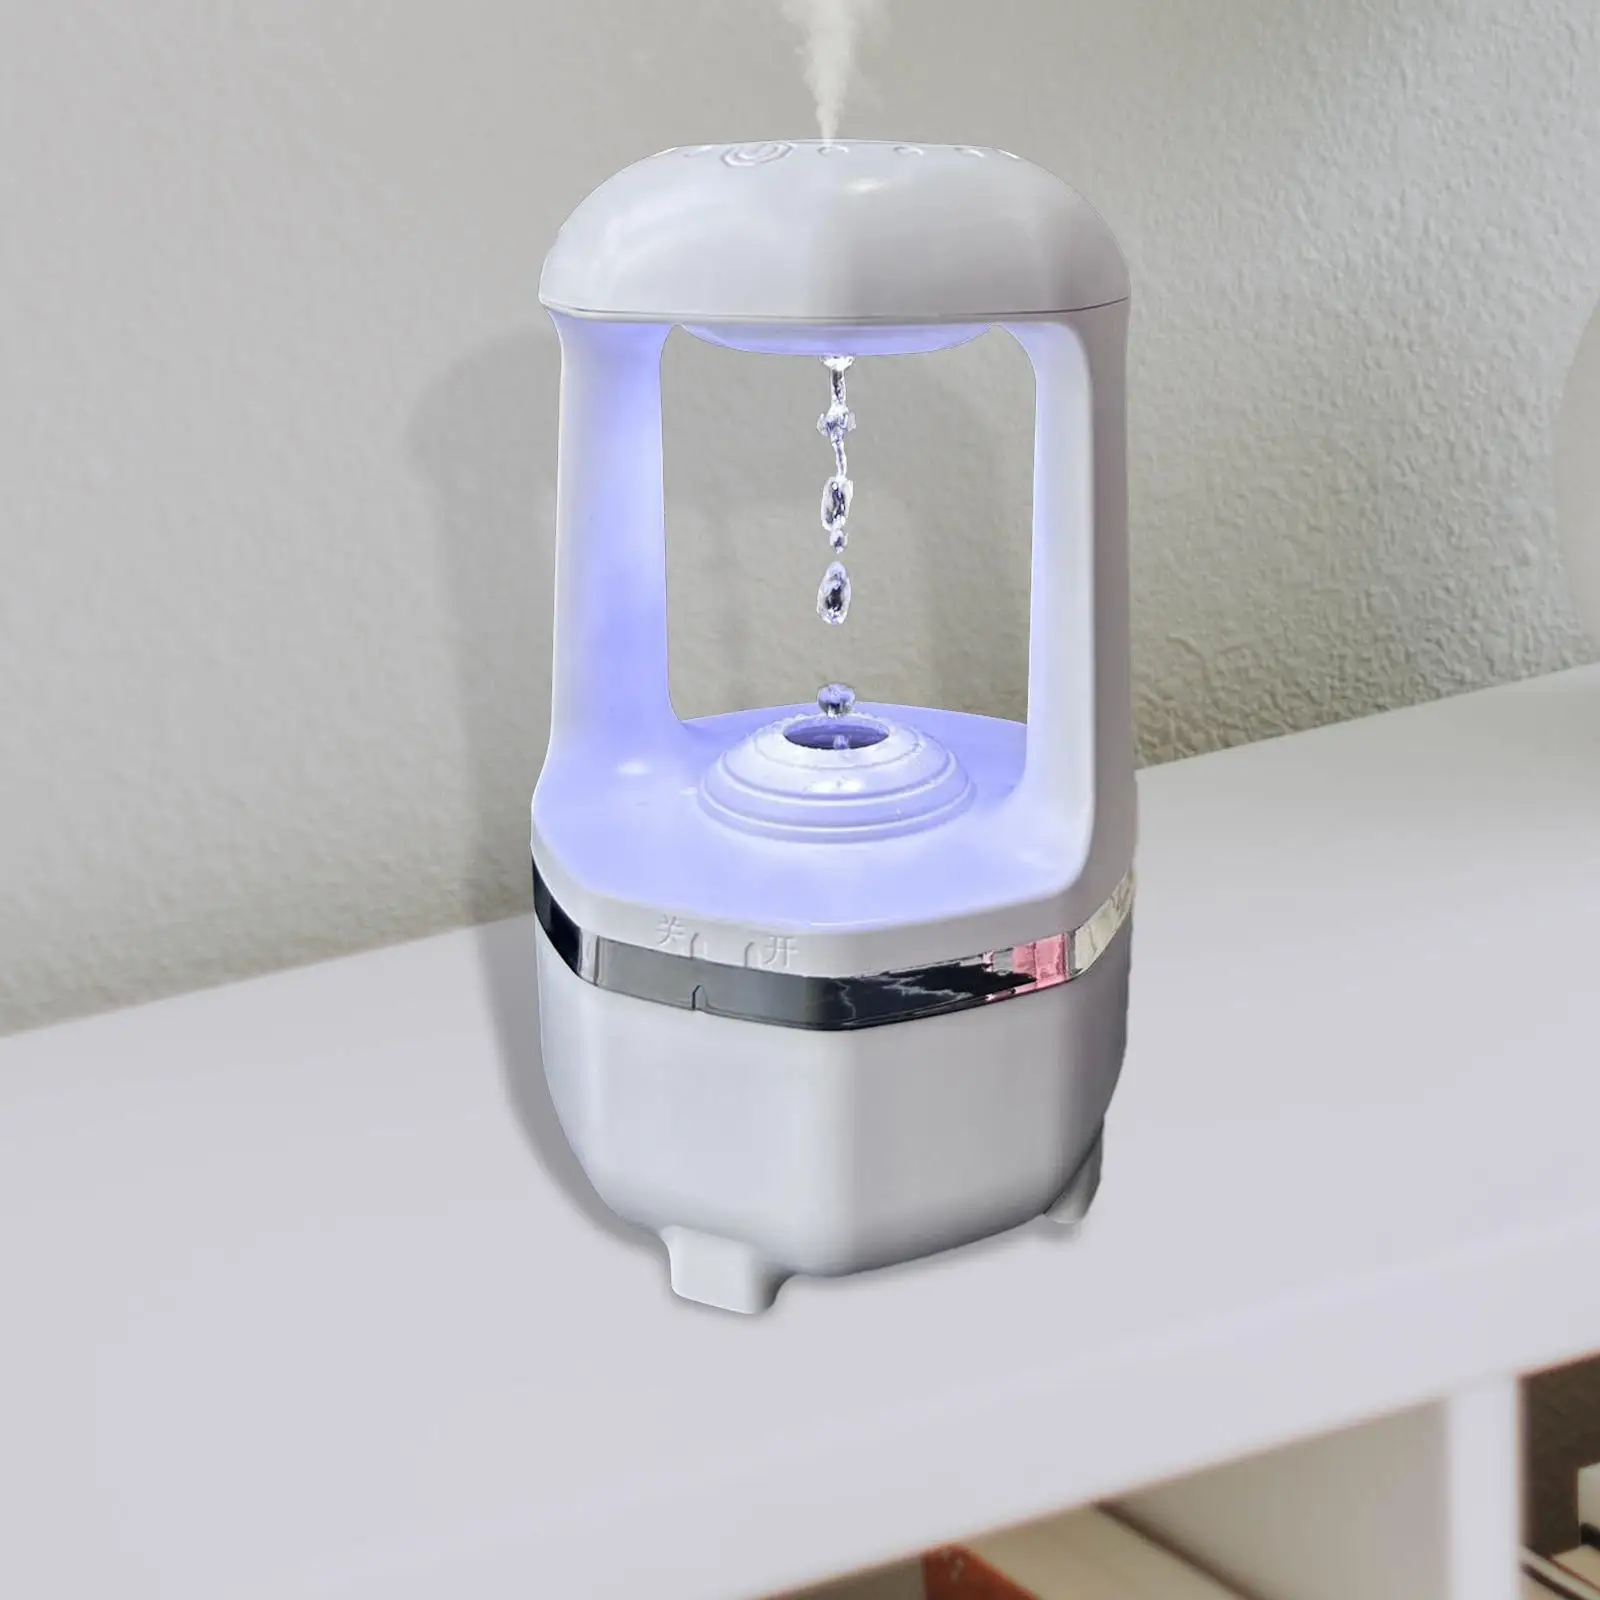 

Anti Gravity Humidifier 500ml Quiet Water Droplet USB Night Light Air Purifier Mist Humidifier for Whole House Nursery Kids Room